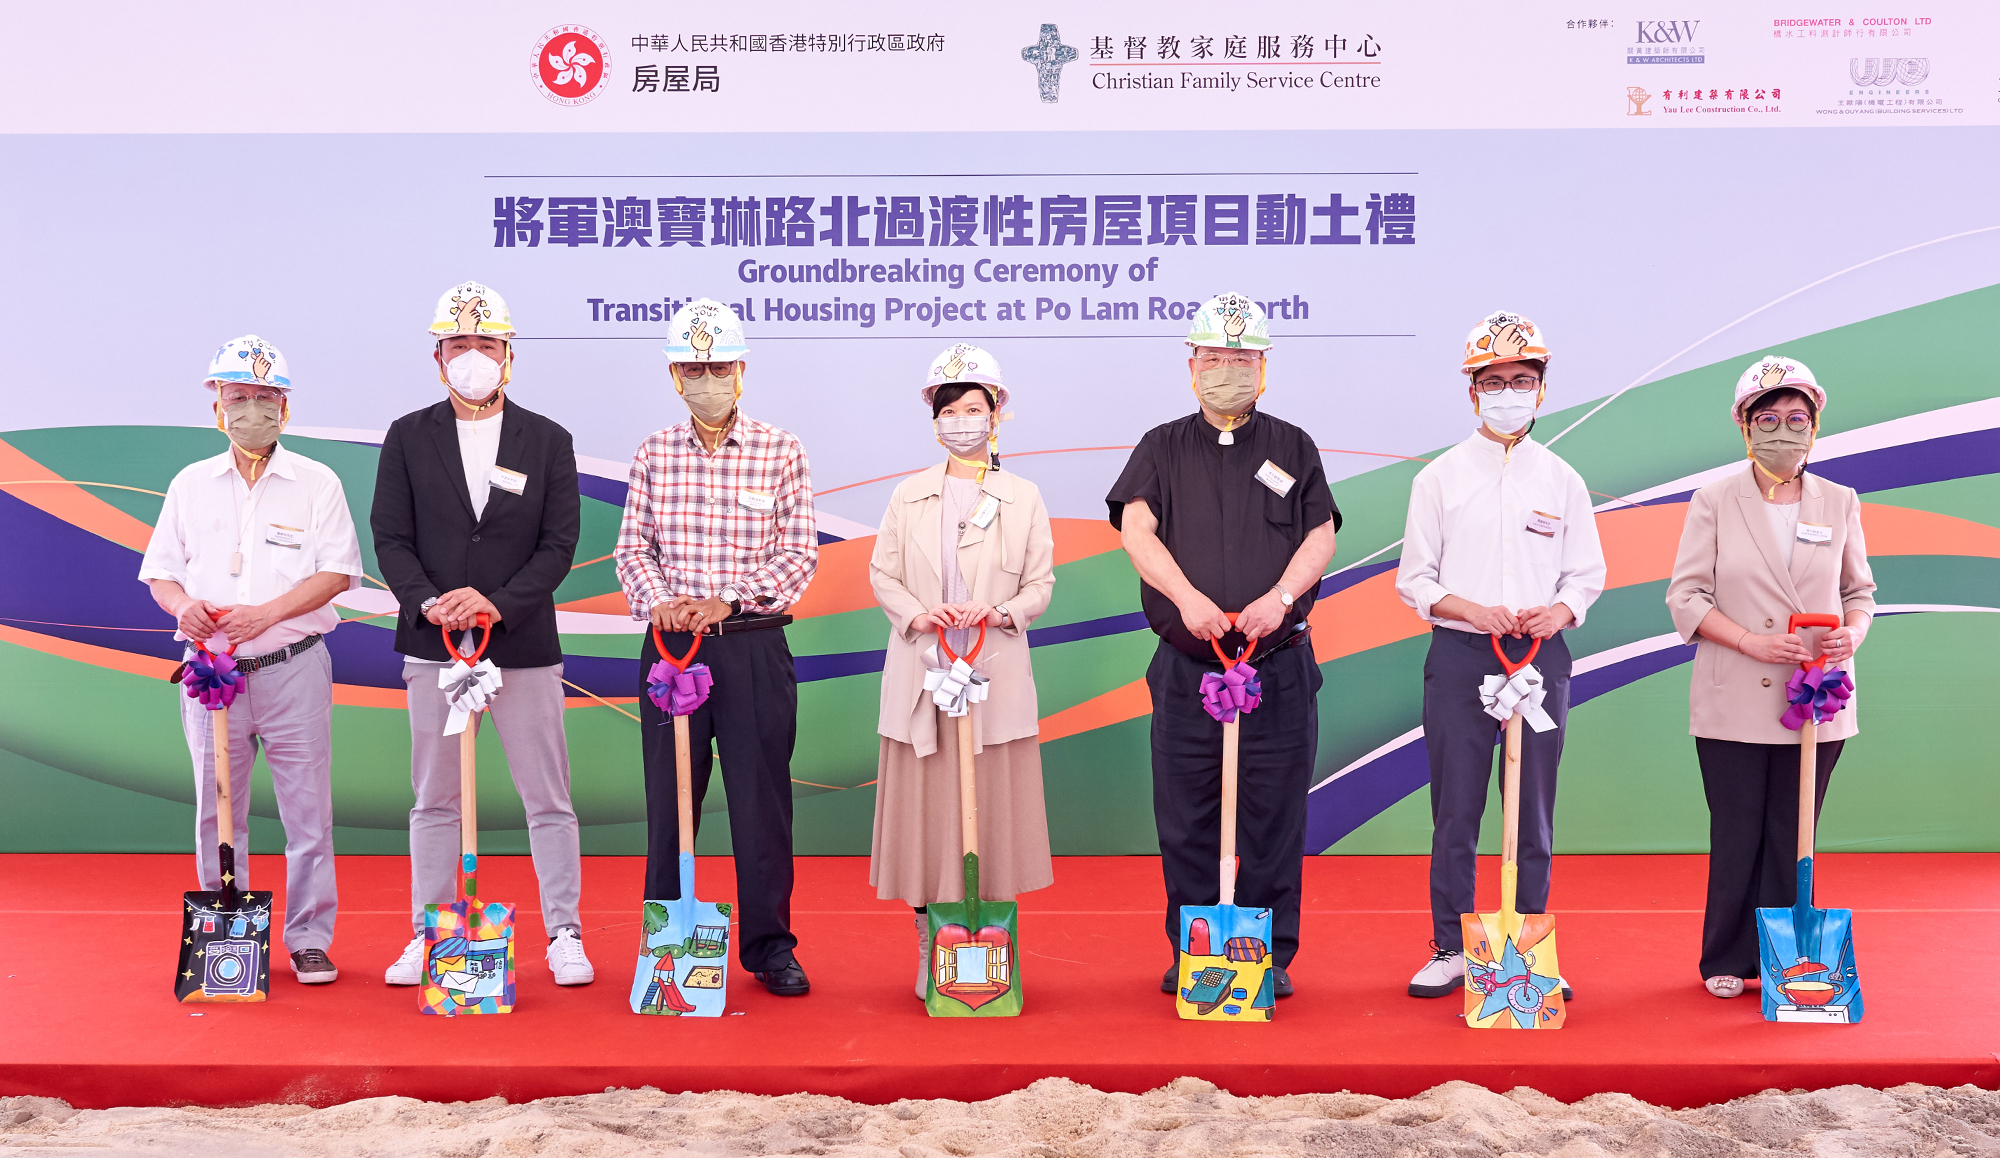 Cover Image - Transitional Housing Project at Po Lam Road North, Tseung Kwan O Ground Breaking Ceremony